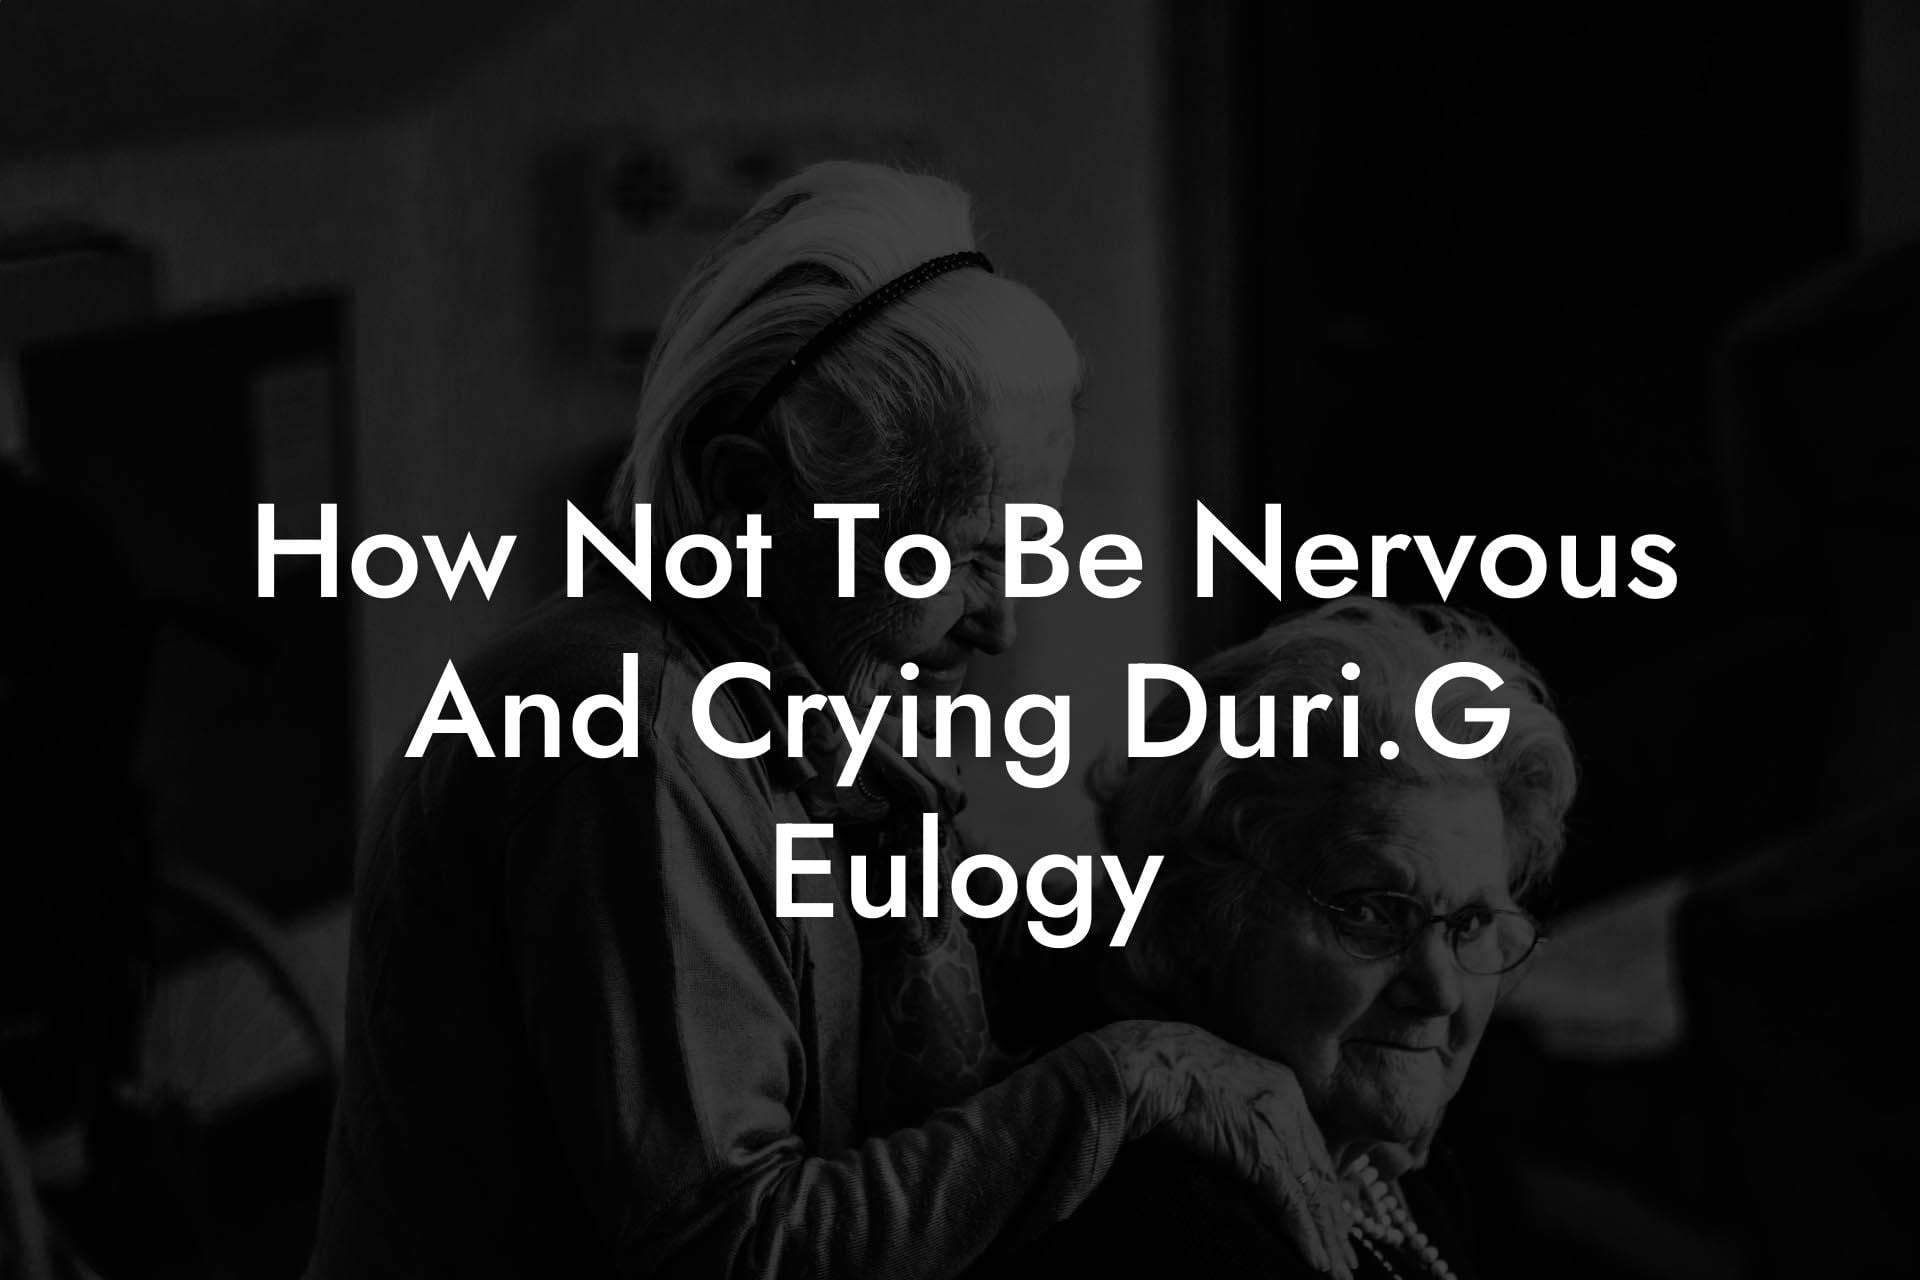 How Not To Be Nervous And Crying Duri.G Eulogy